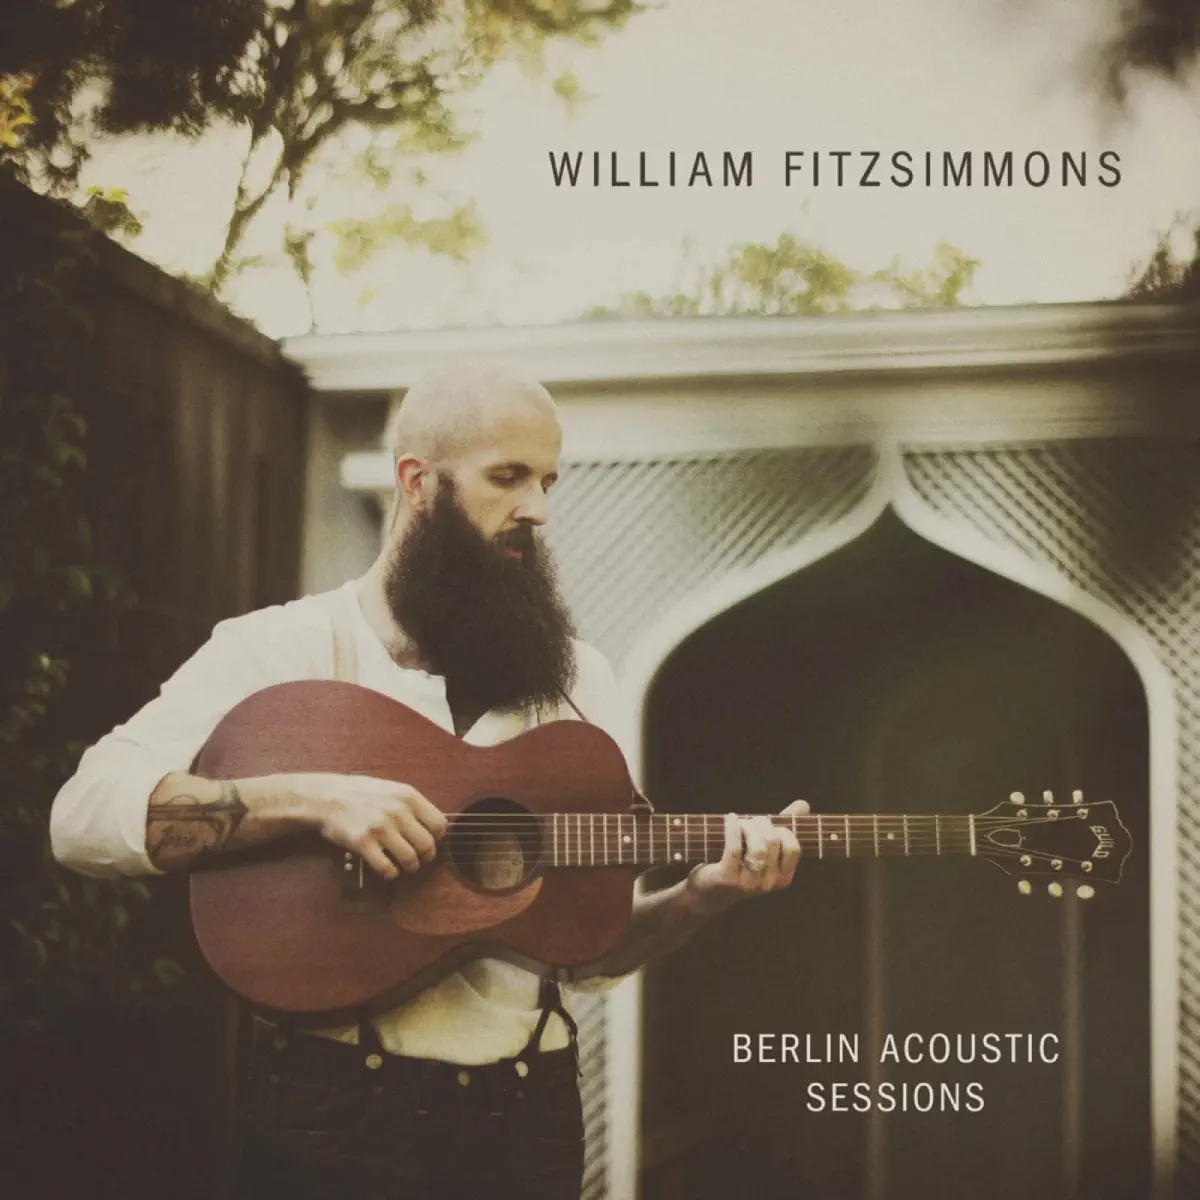 William Fitzsimmons - Berlin Acoustic Sessions (Live) (2020) [iTunes Plus AAC M4A]-新房子